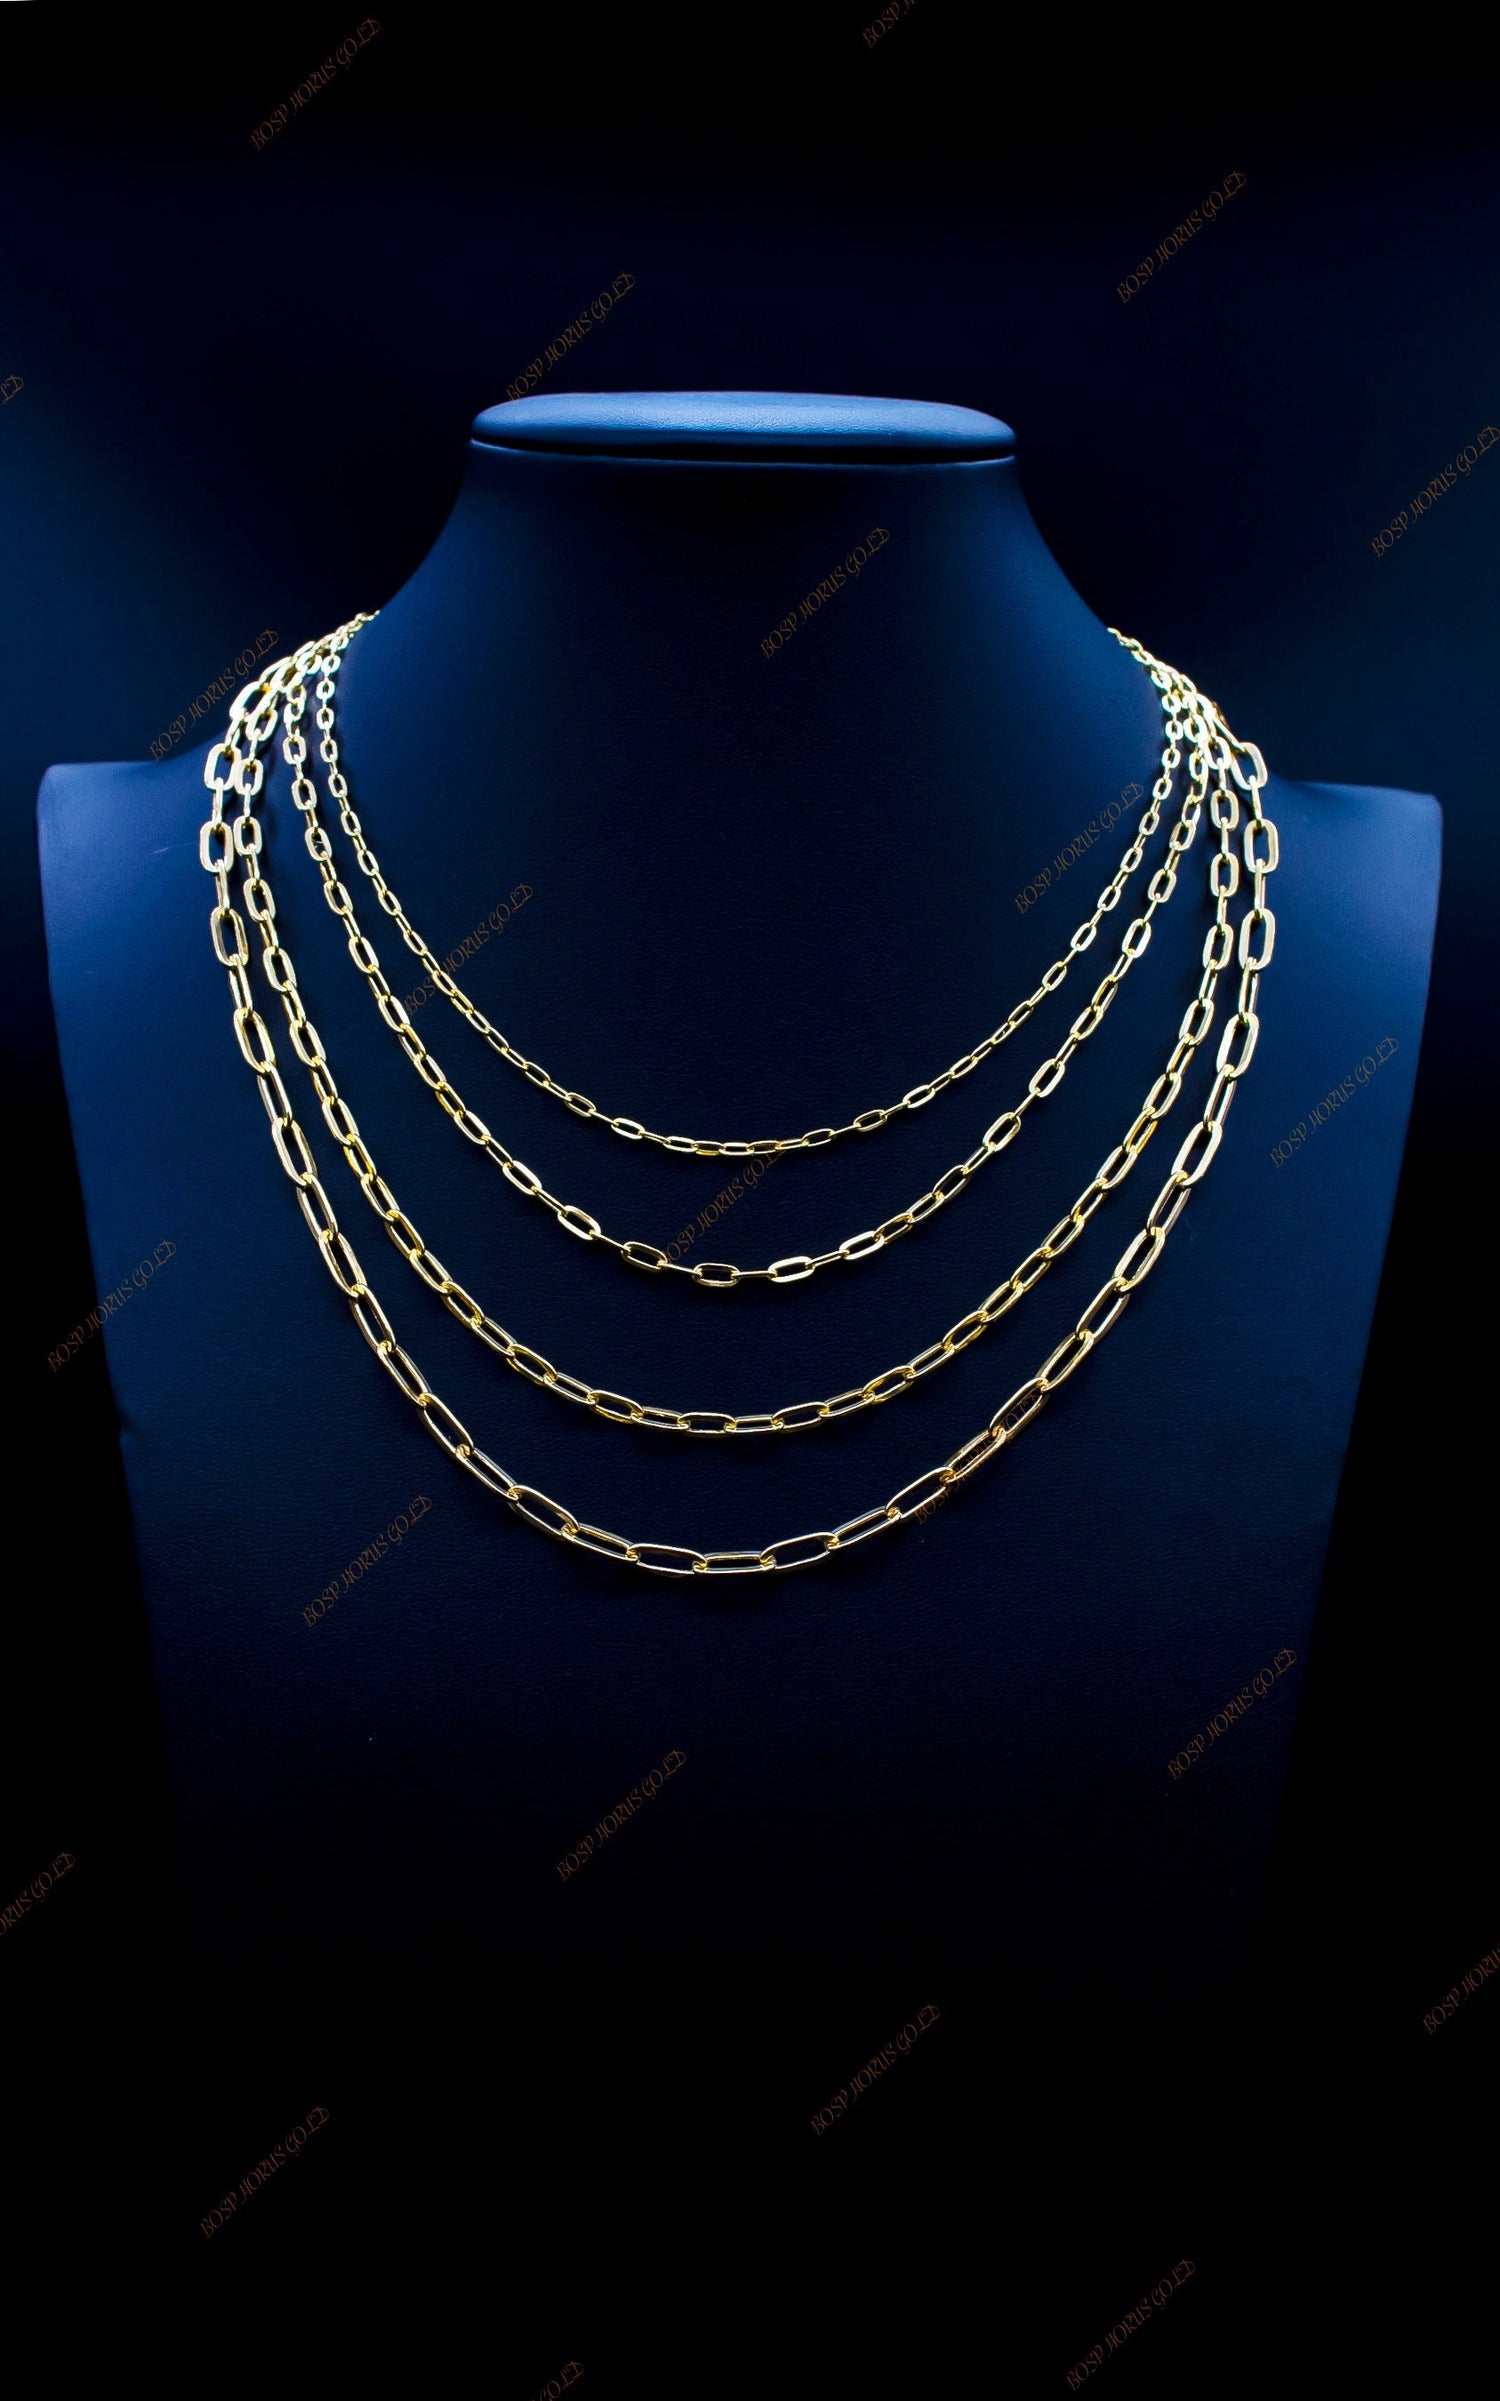 GOLD LARGE PAPERCLIP CHAIN - LENGTH's 16